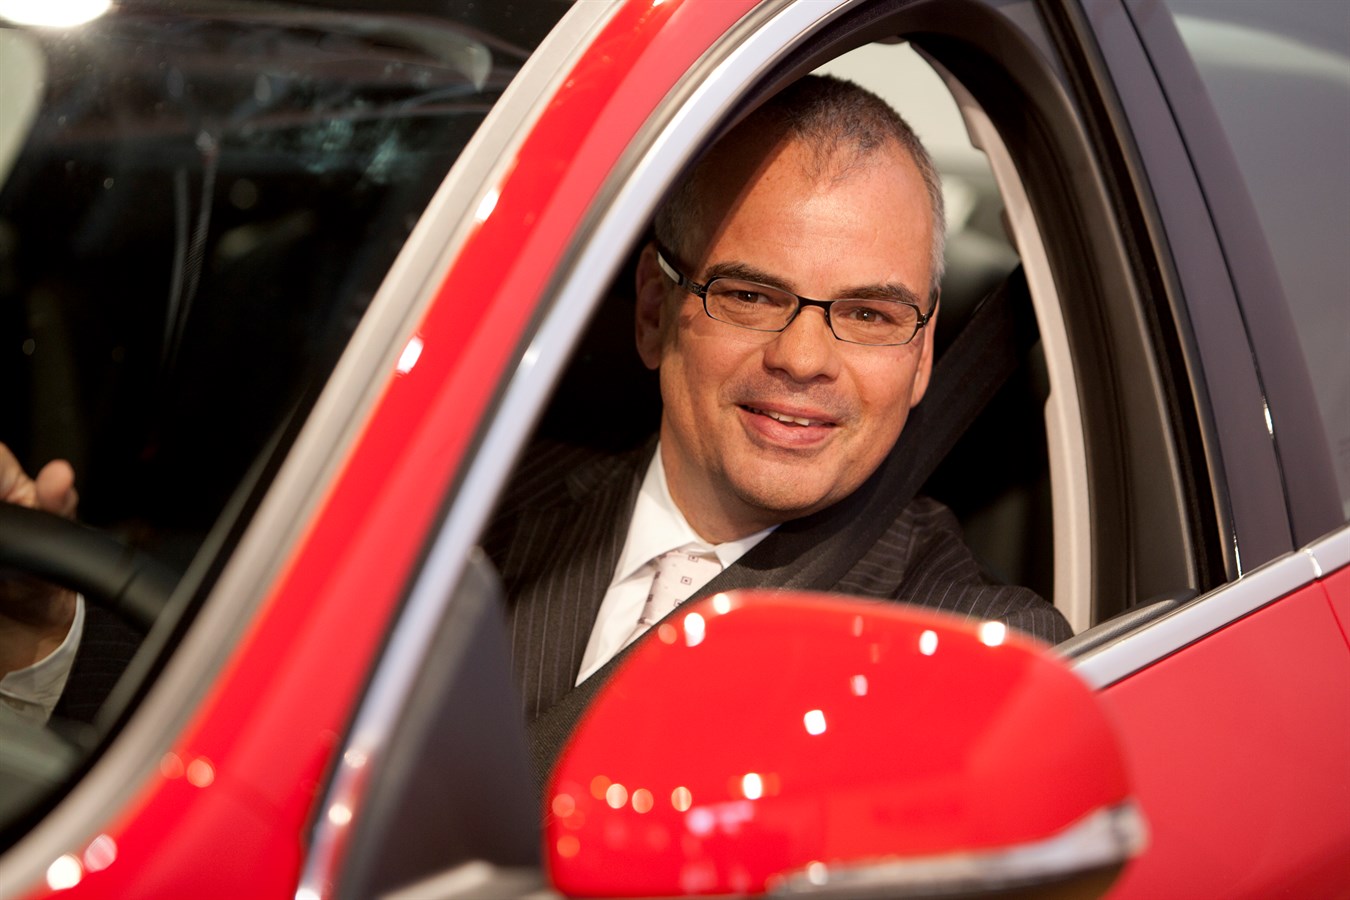 Mr Stefan Jacoby Volvo Cars’ President and Chief Executive Officer (CEO), taking up his role on 16th August, 2010.